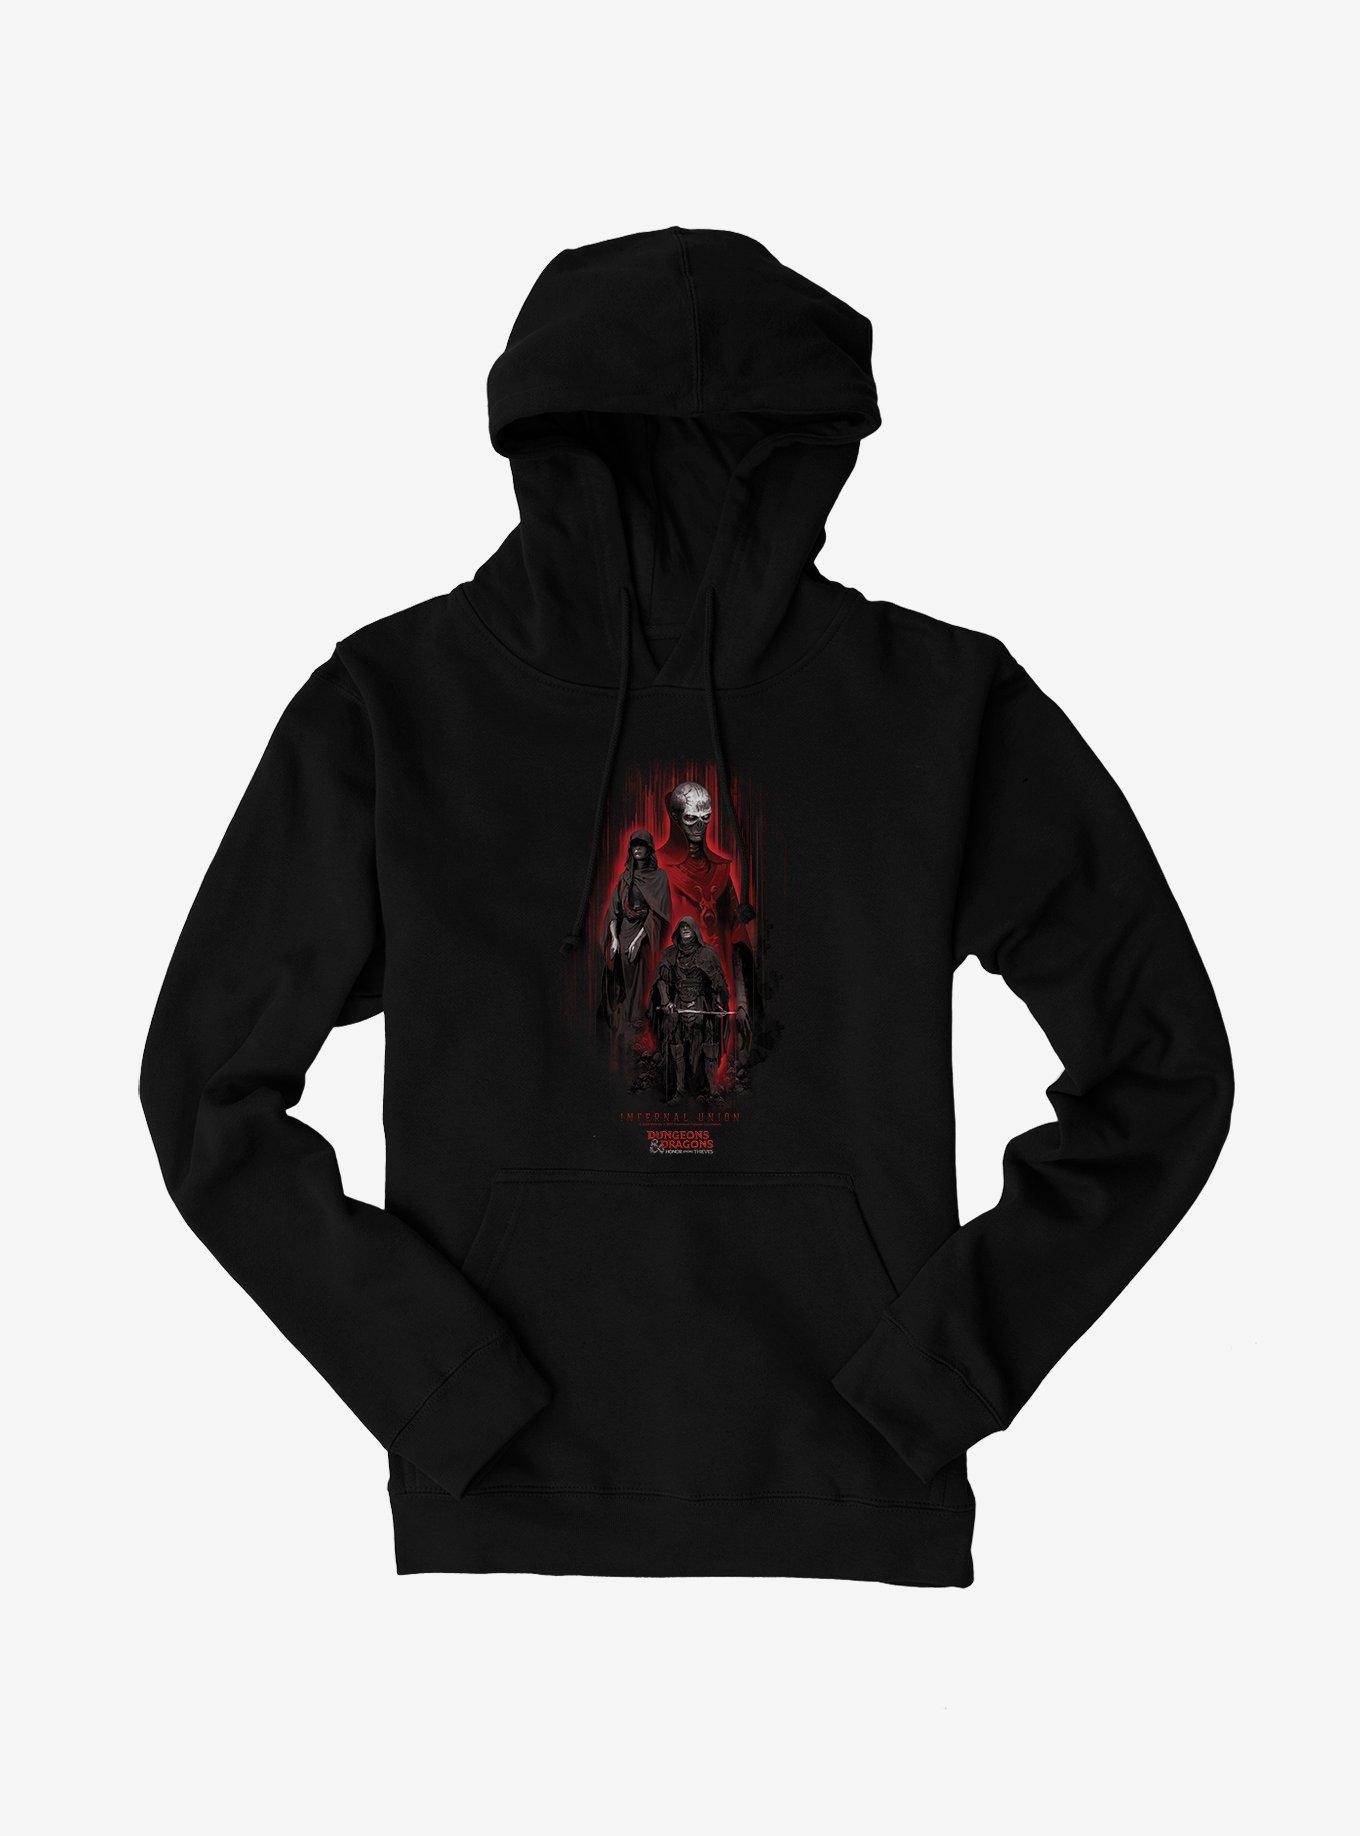 Dungeons & Dragons: Honor Among Thieves Szass Tam Infernal Union Hoodie, BLACK, hi-res